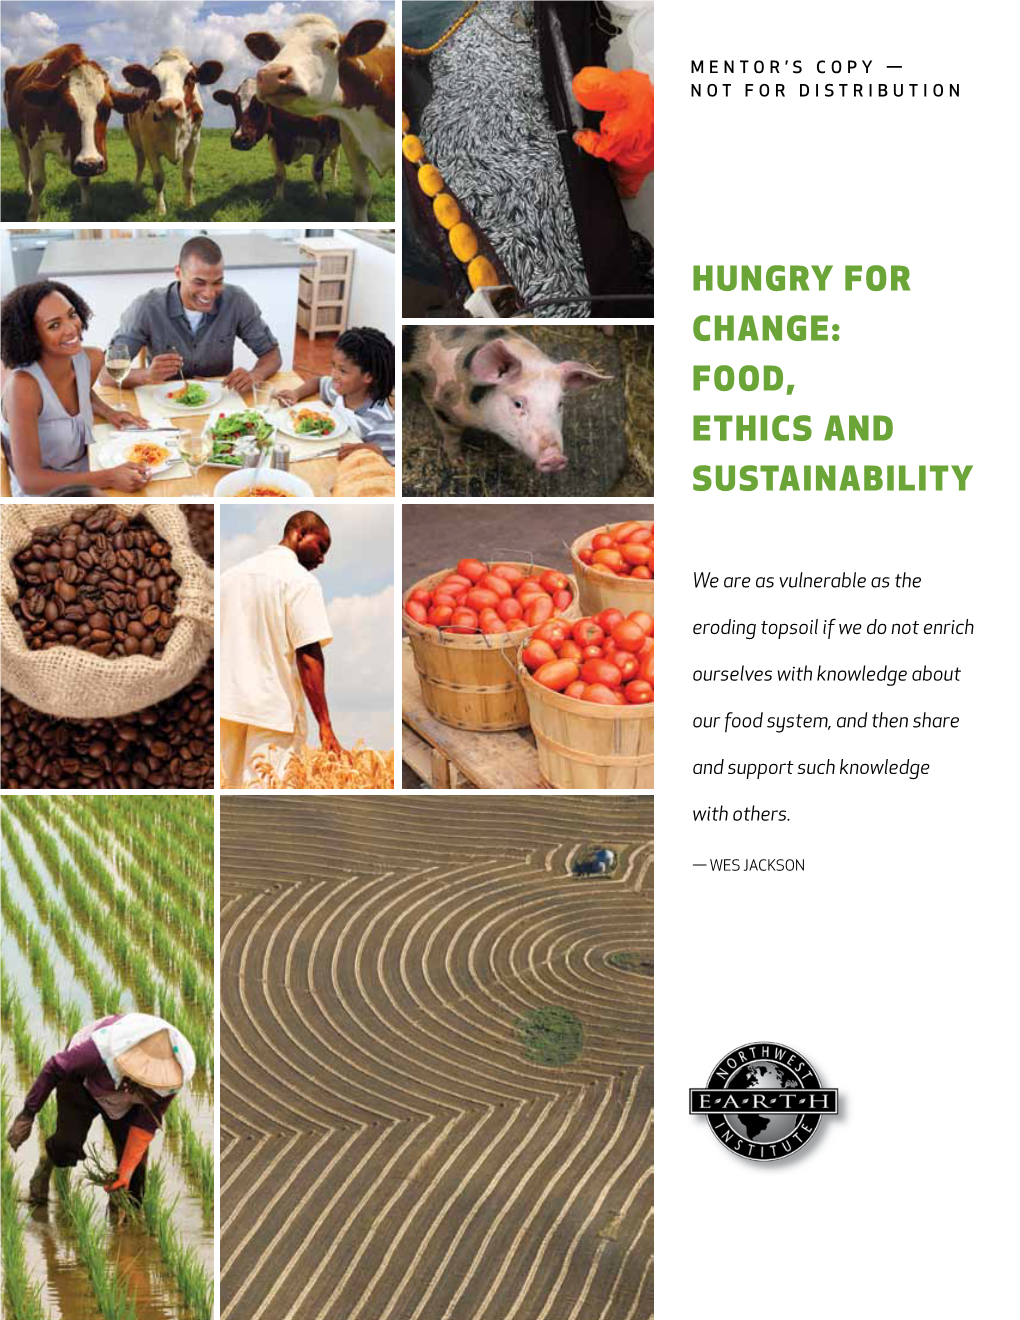 Hungry for Change: Food, Ethics and Sustainability